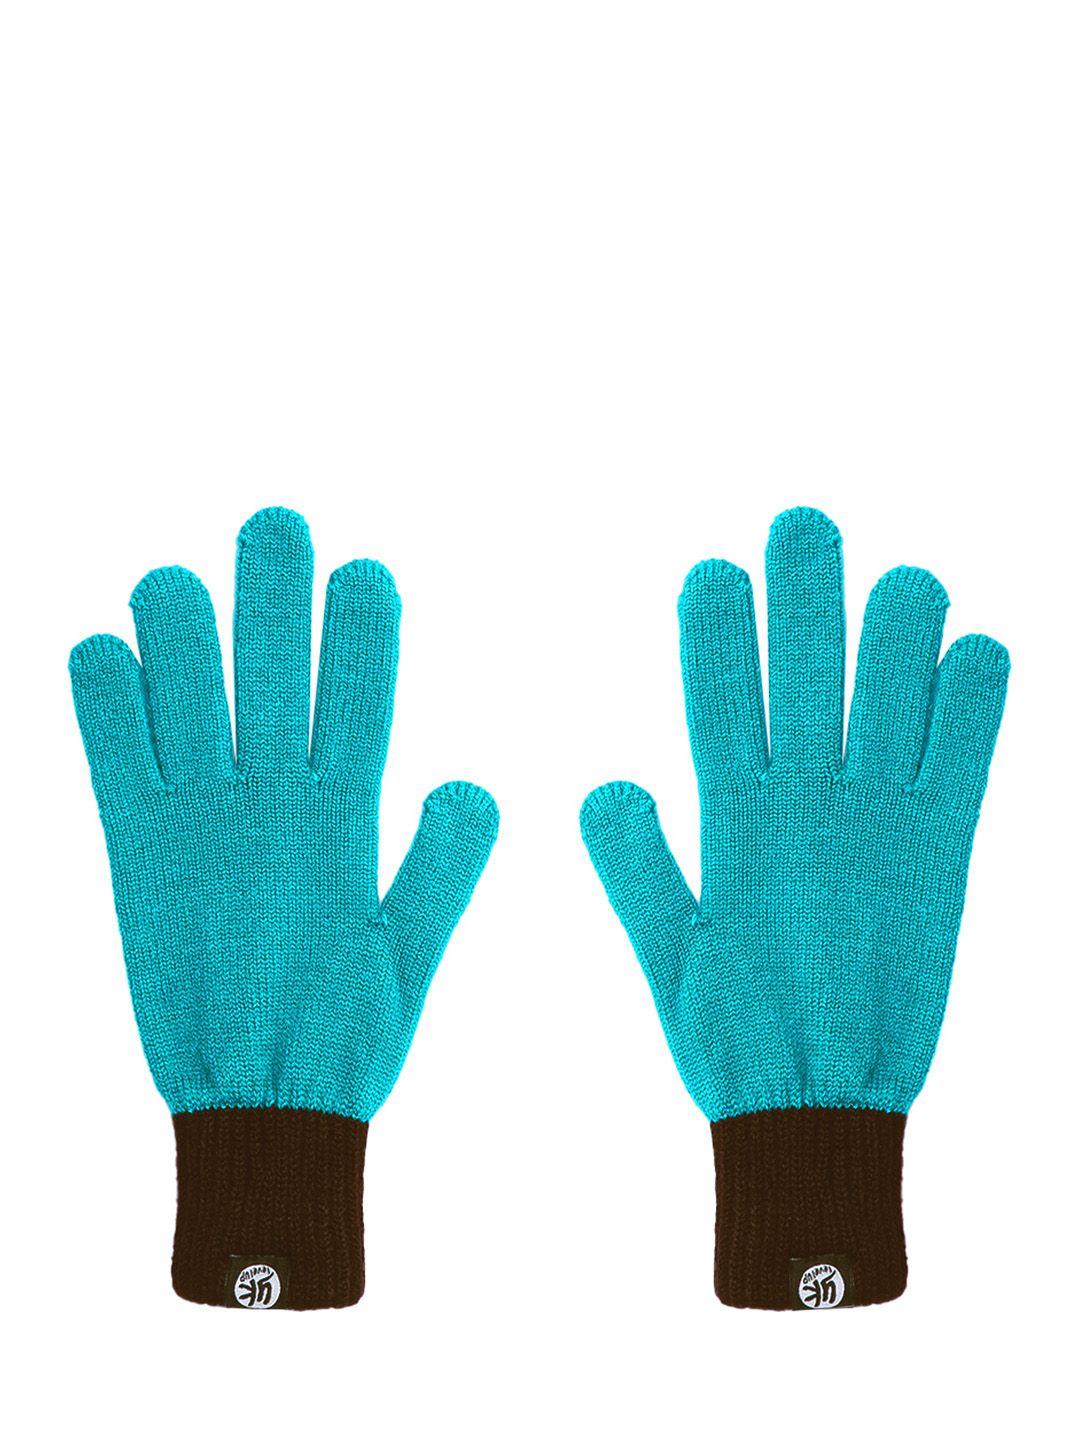 yk kids turquoise blue & coffee brown colourblocked detail hand gloves